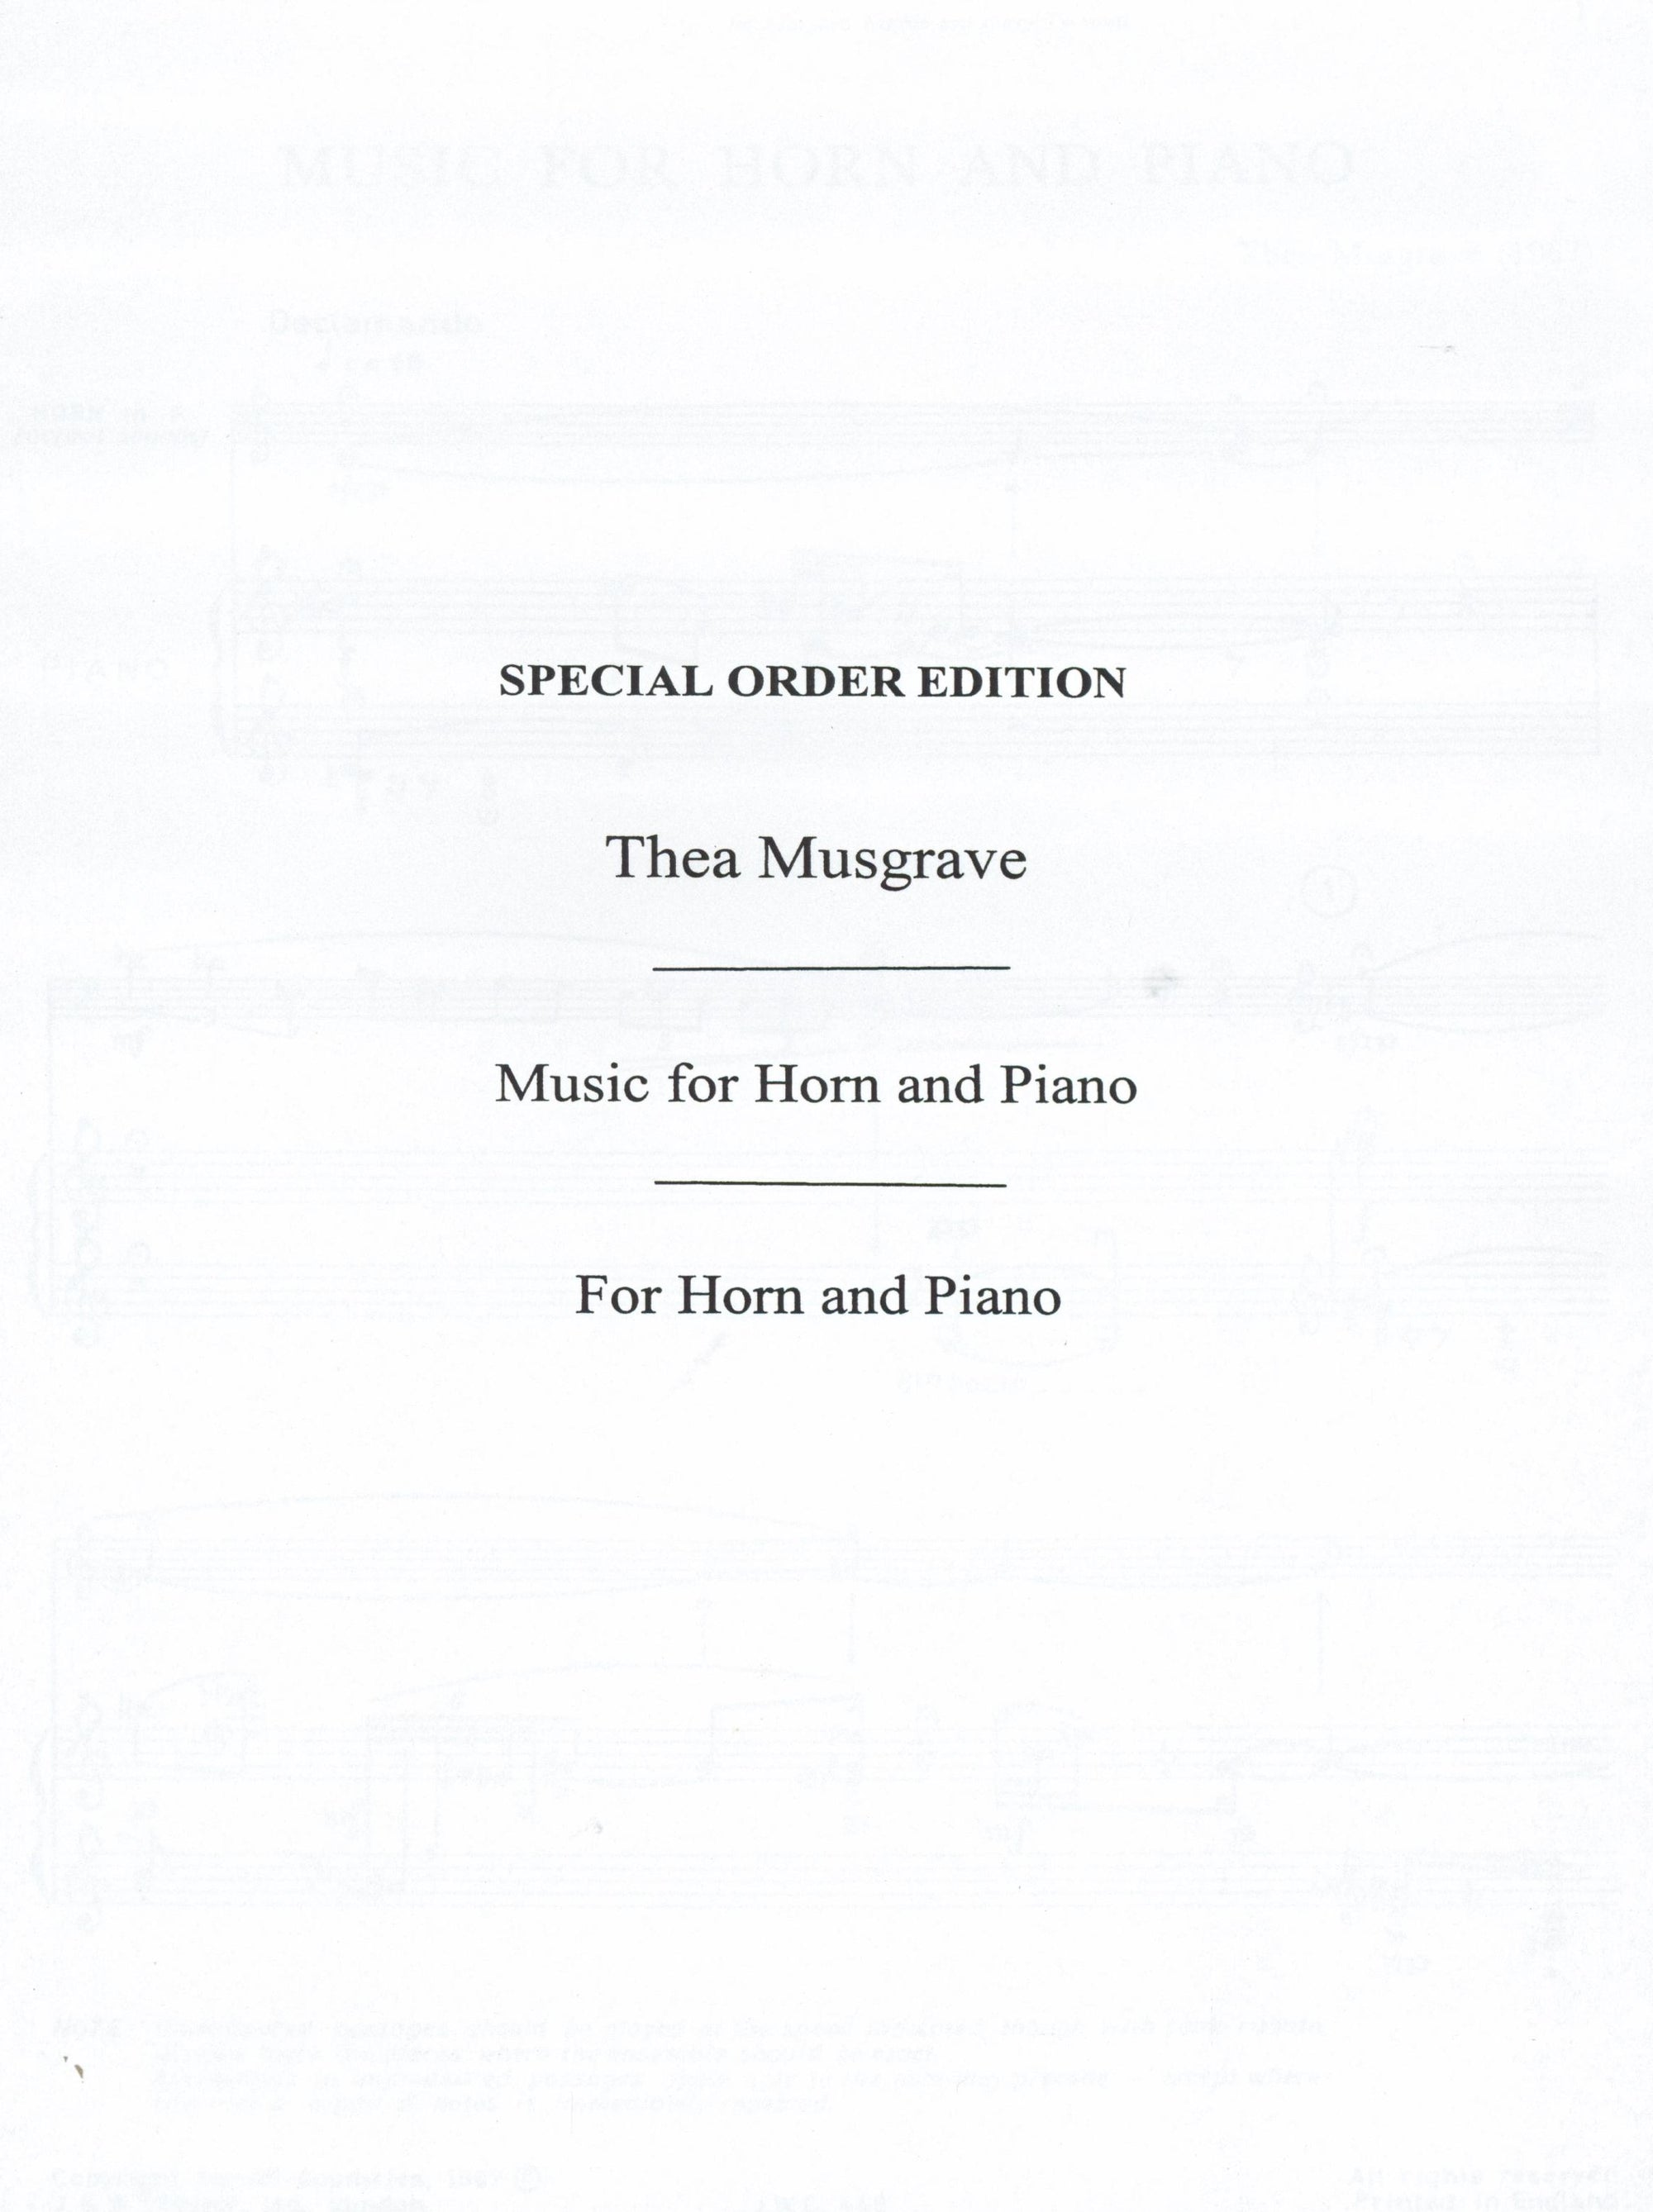 Musgrave: Music for Horn and Piano